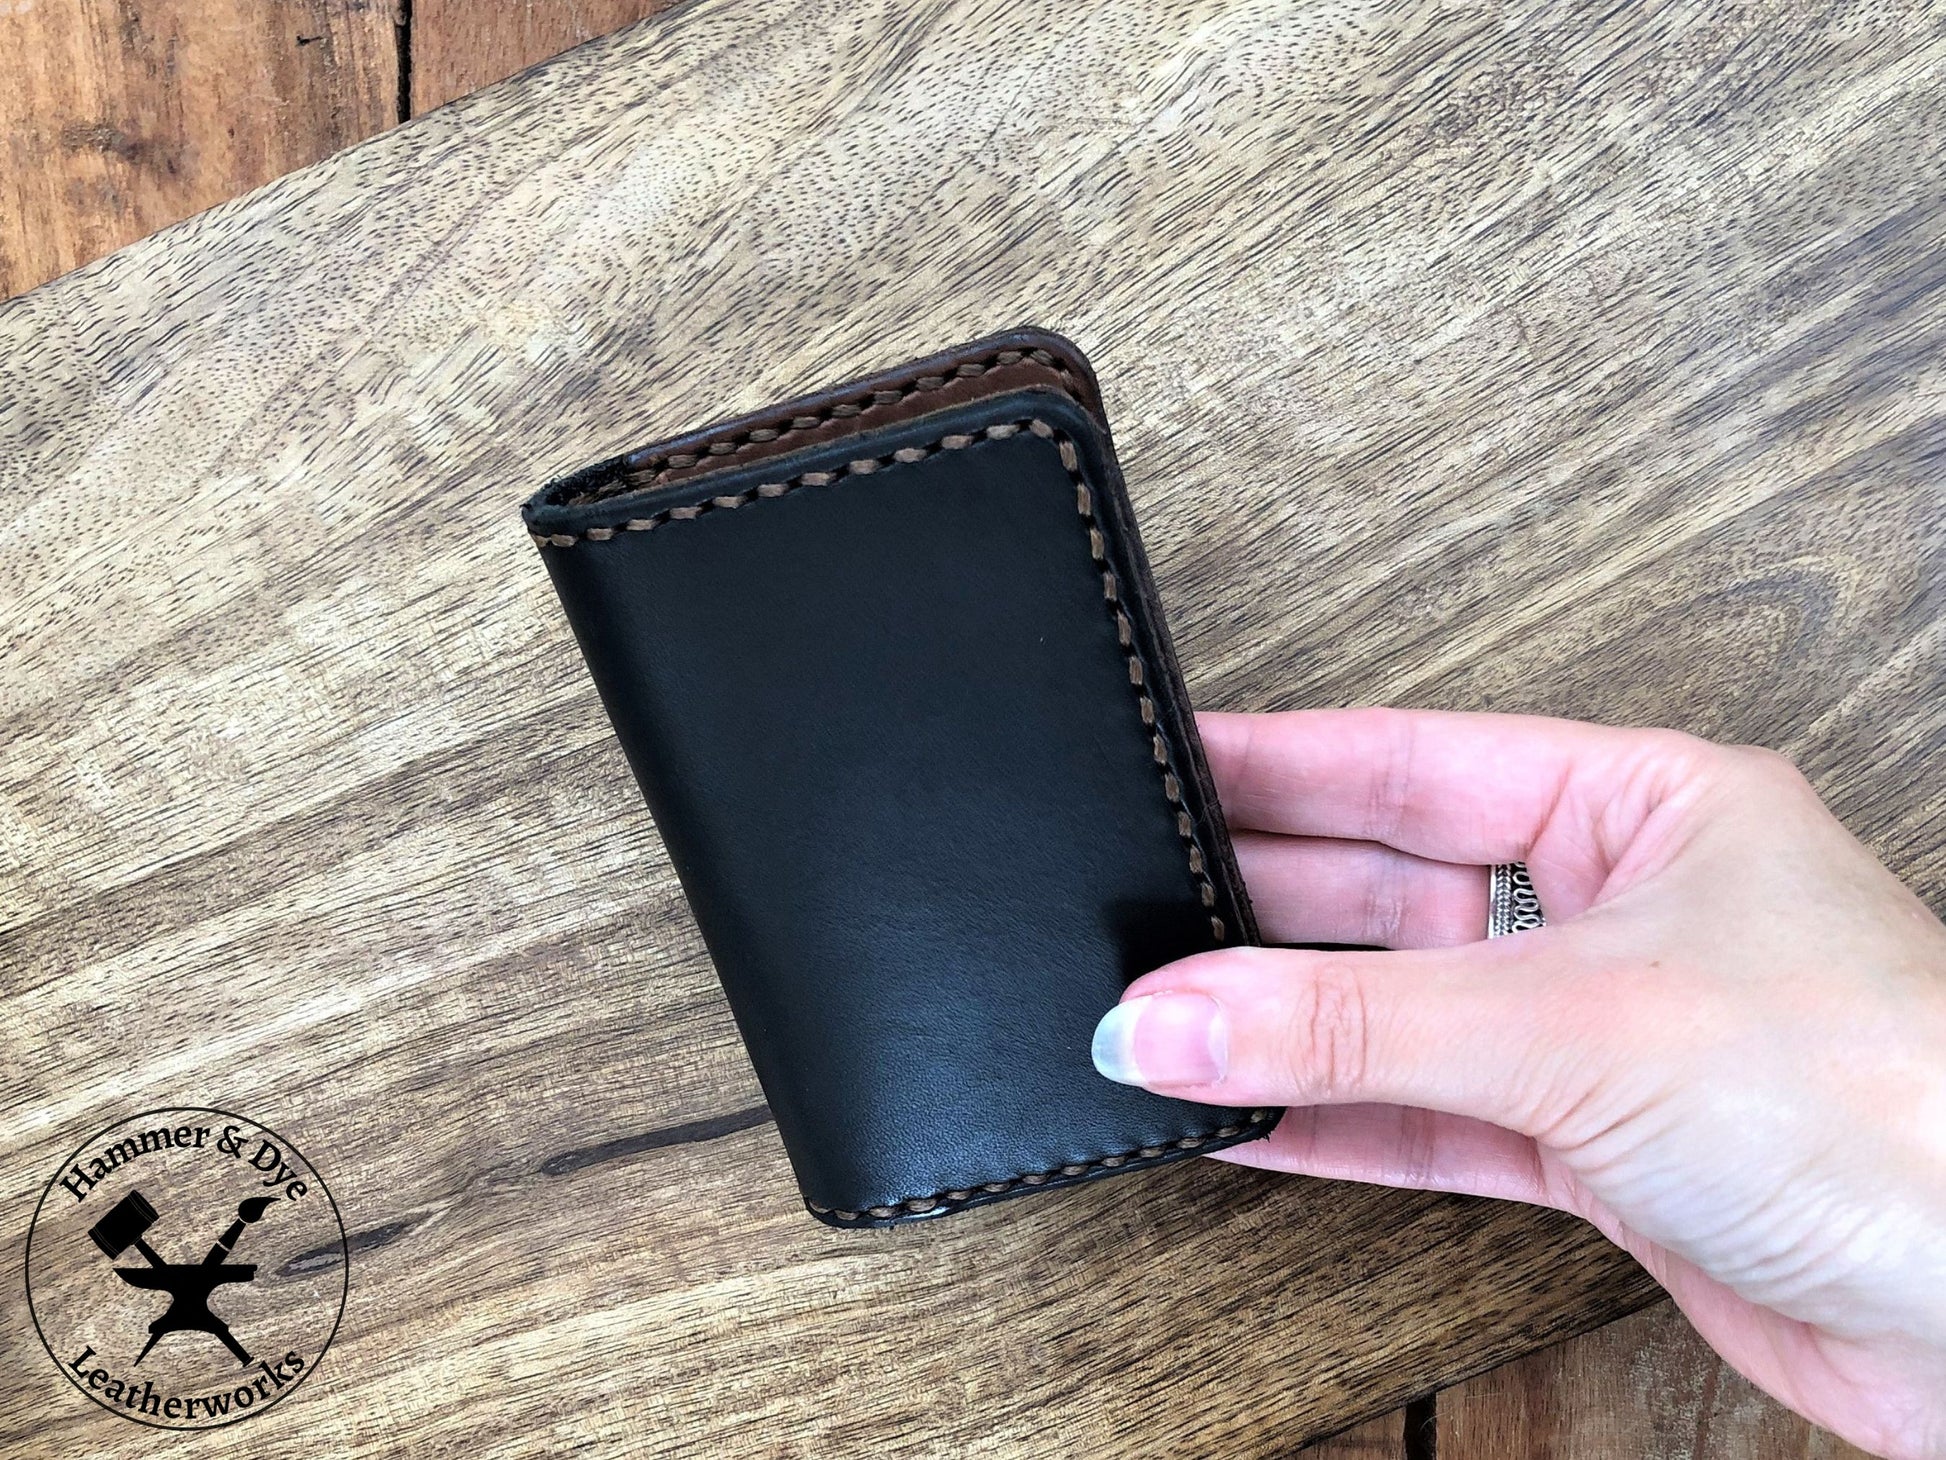 Handmade Two-tone Bifold Leather Card Wallet in Black and Brown with brown stitching held in a hand